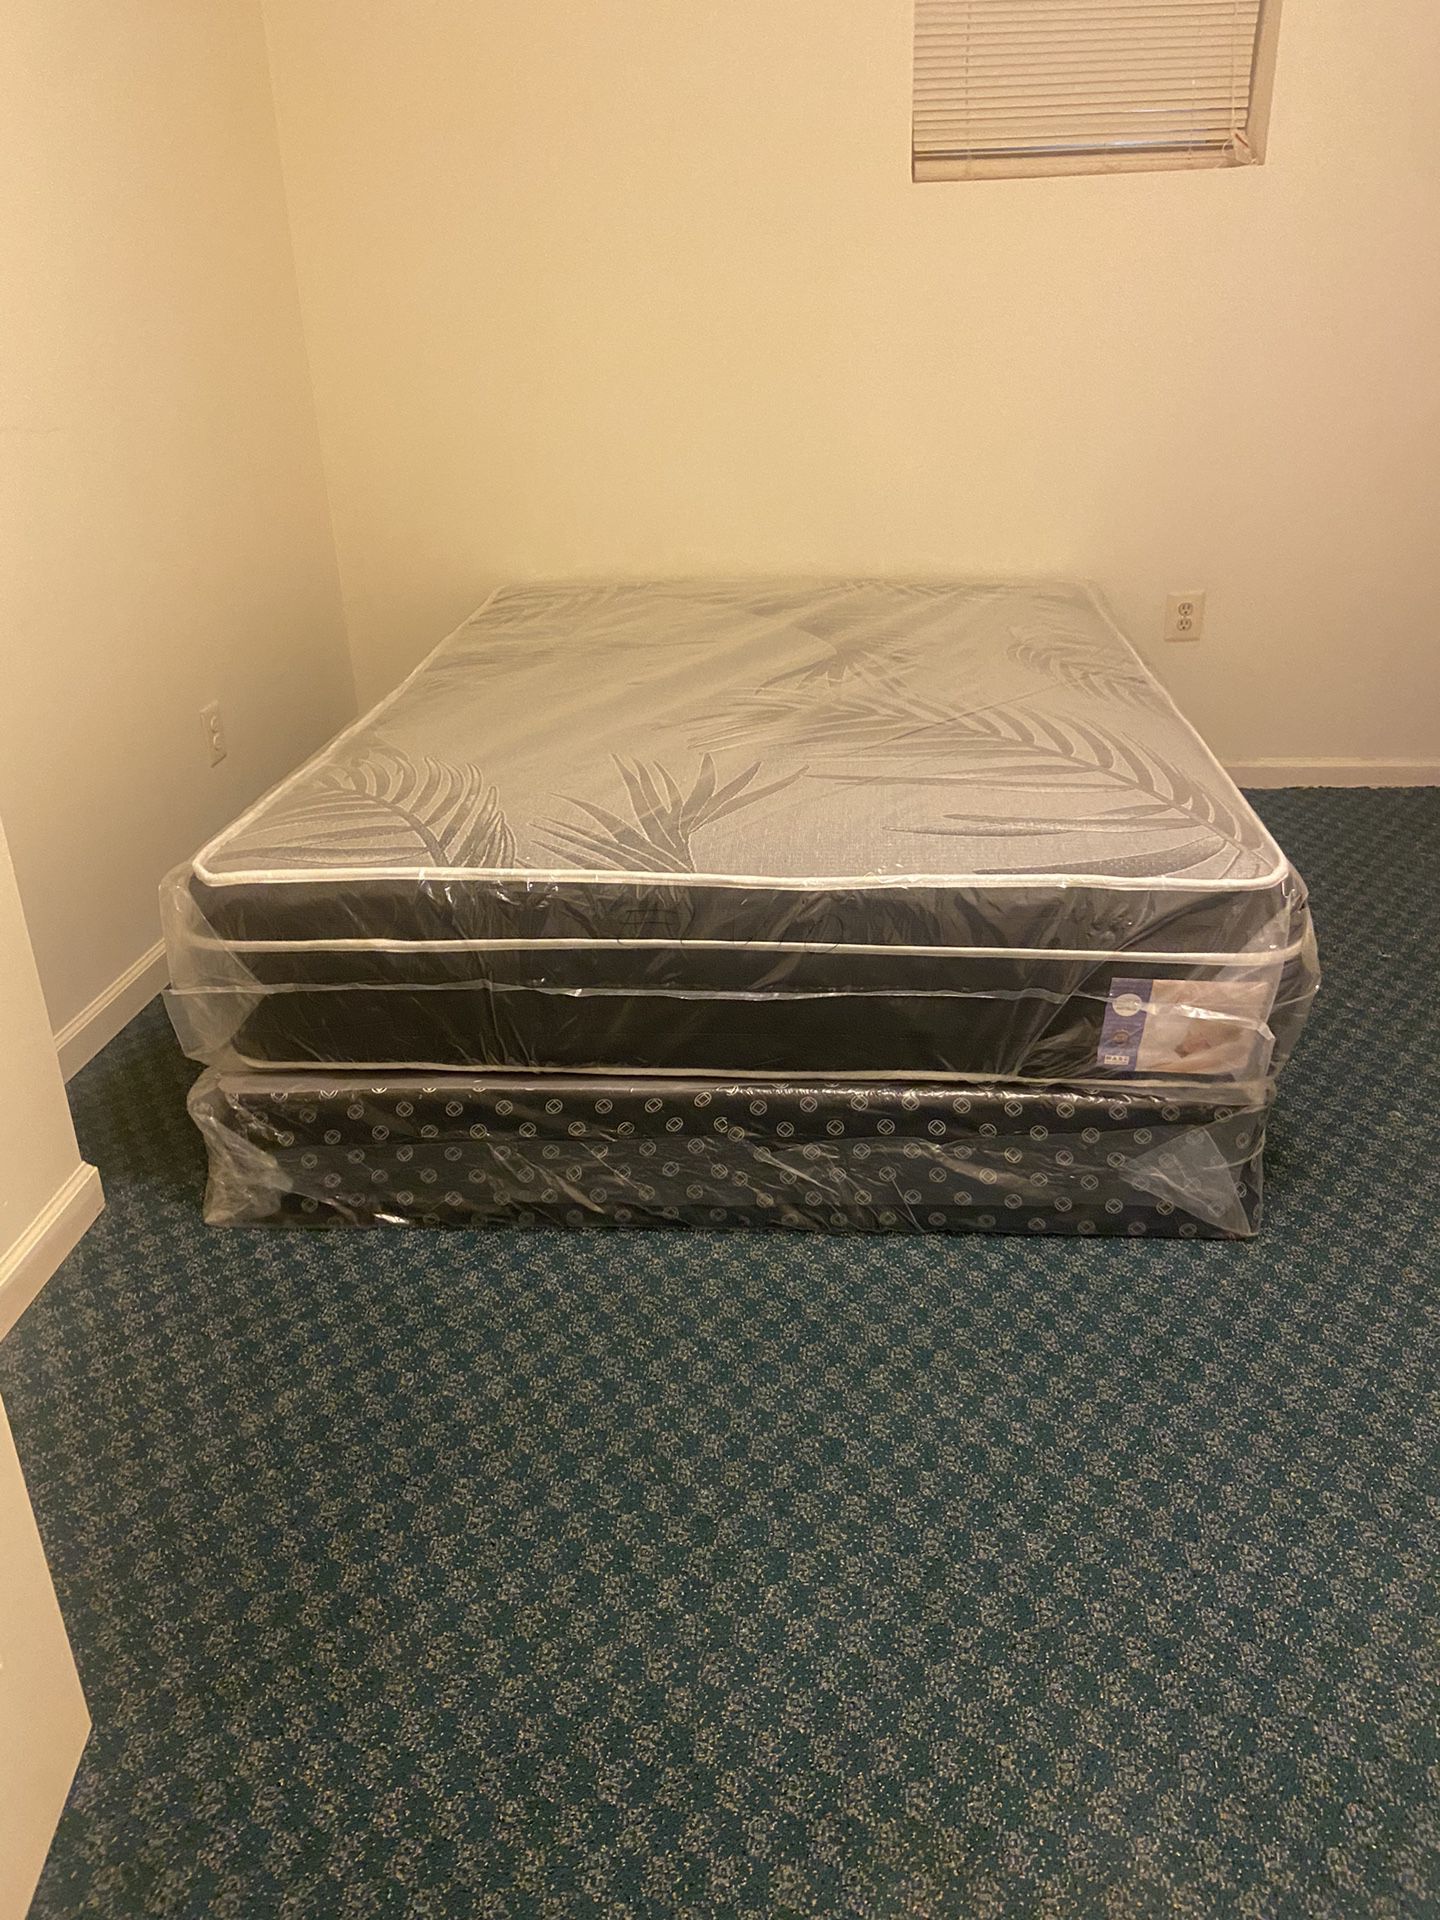 Mattress Come With Free Box Spring  - Free Delivery 🚚 Today To Reasonable Distance 